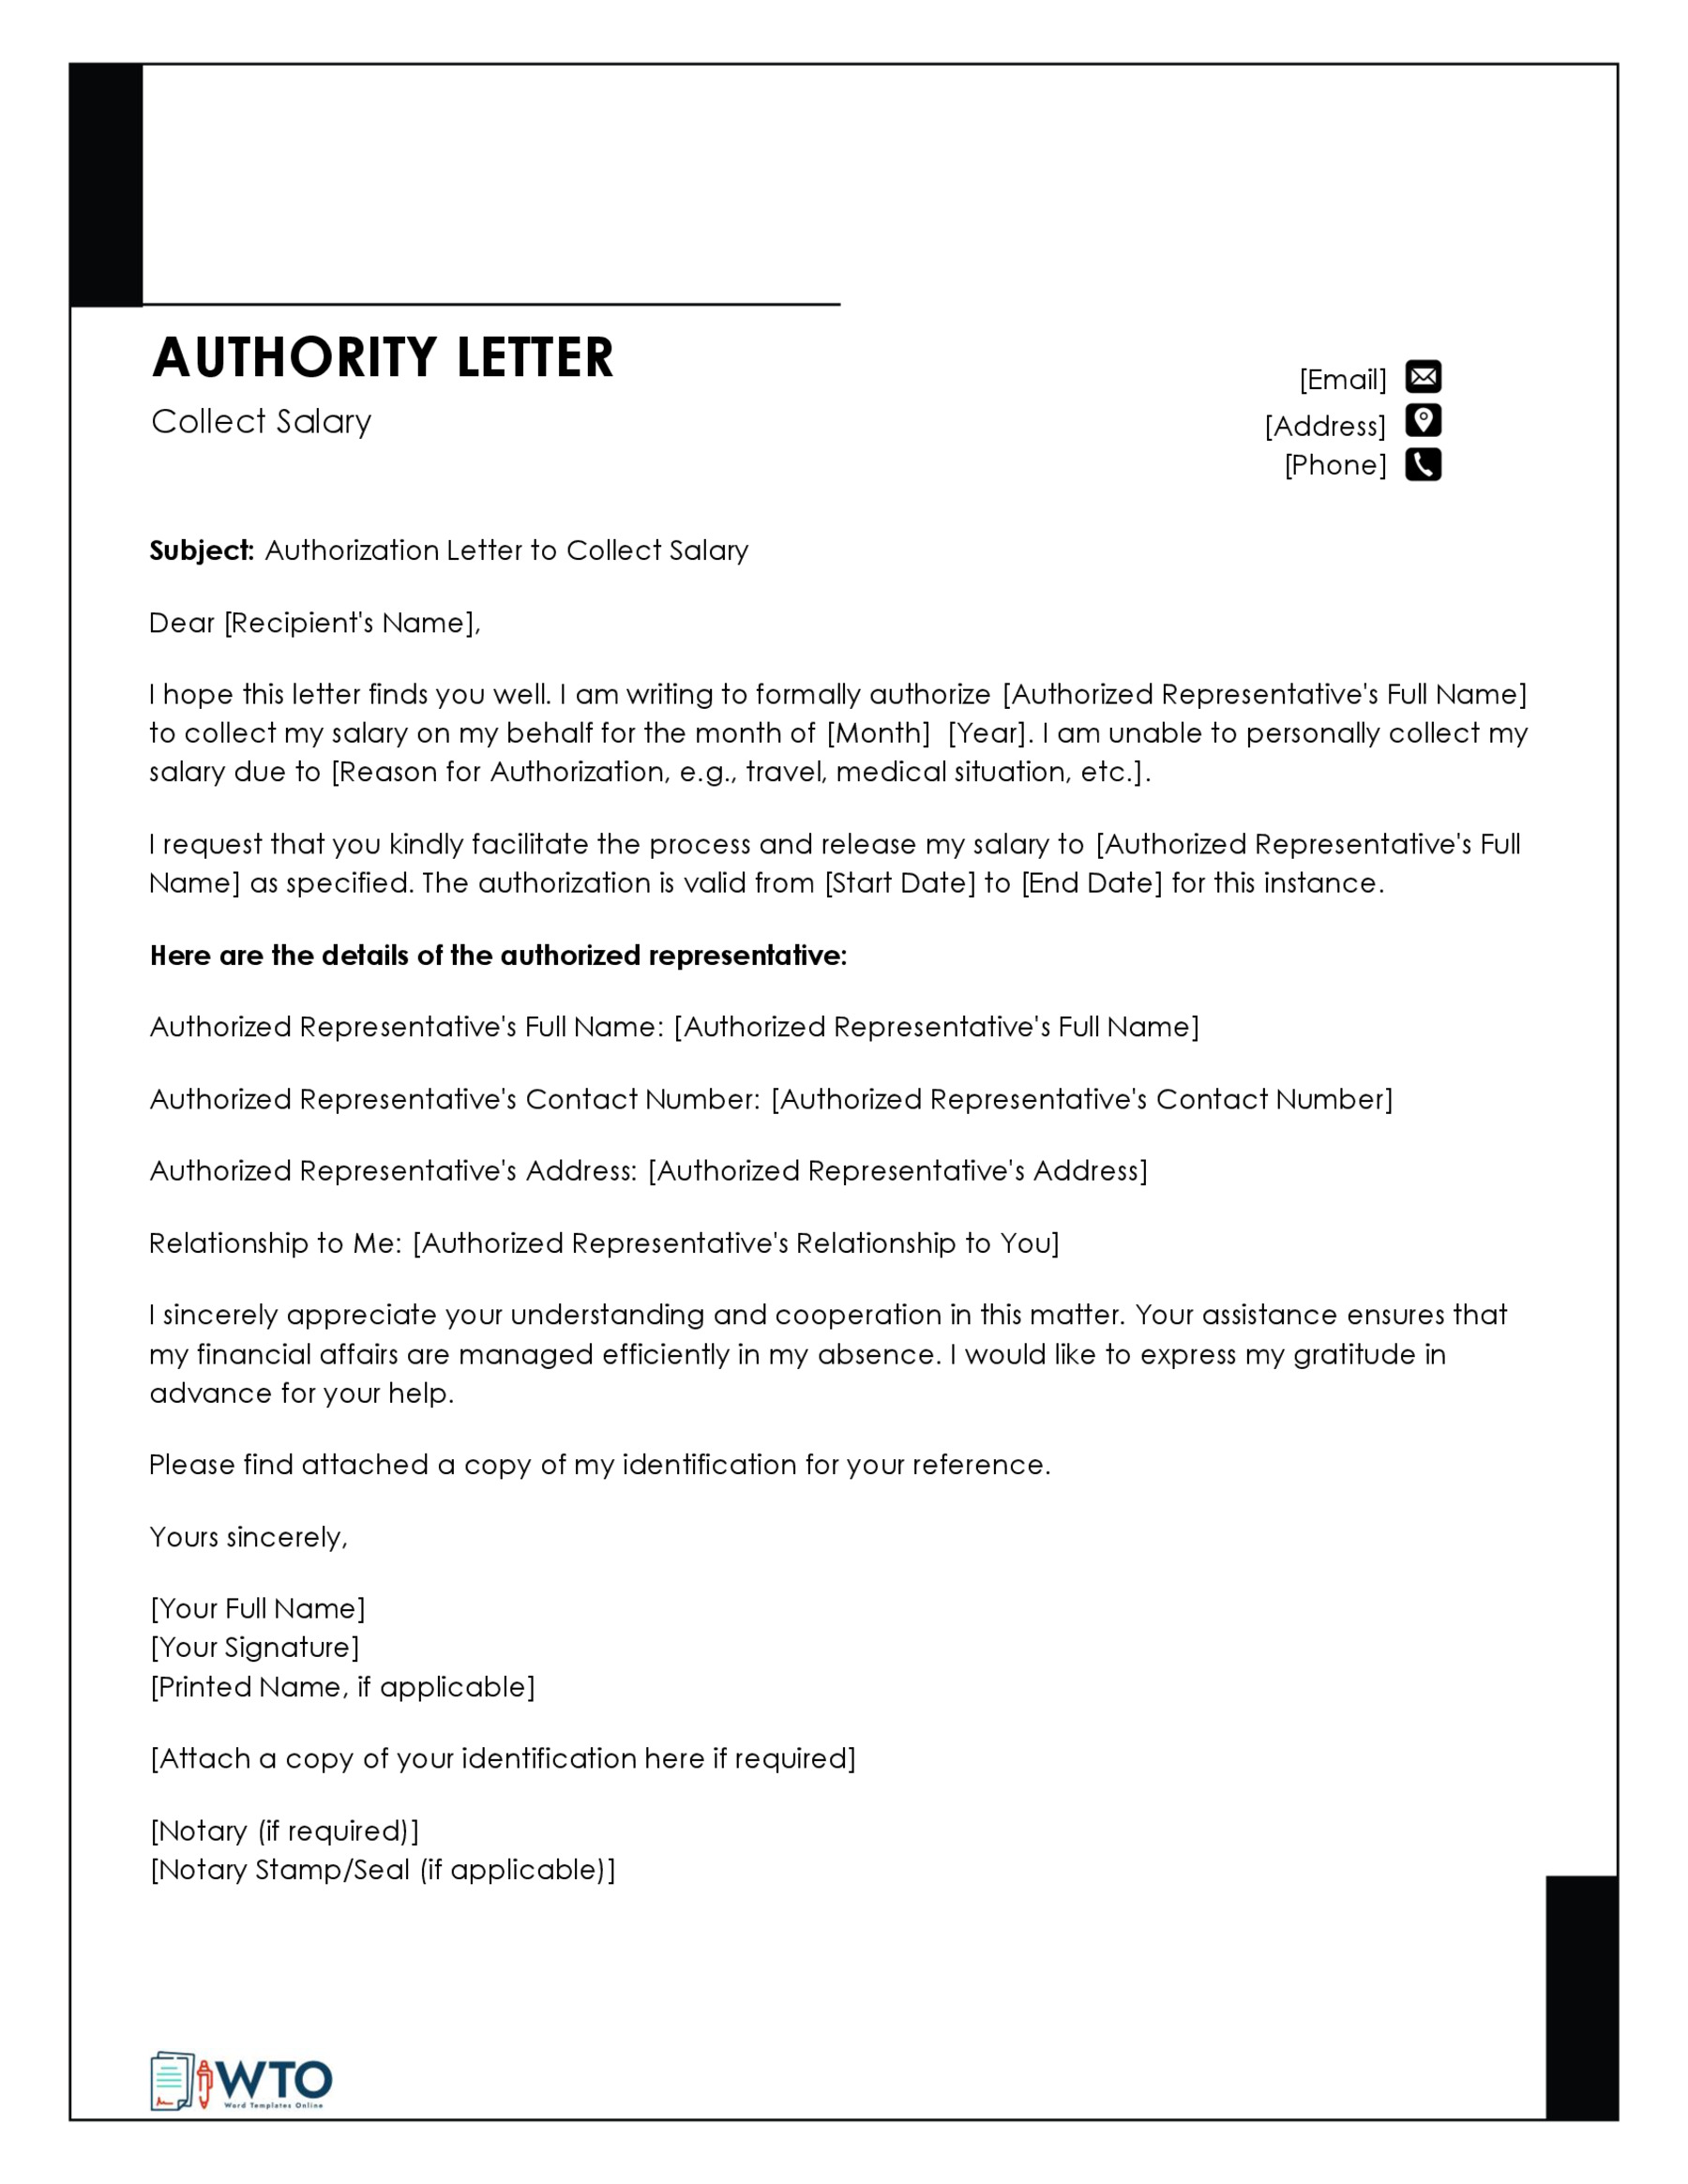 Letter to Collect Salary Template Free downlaod